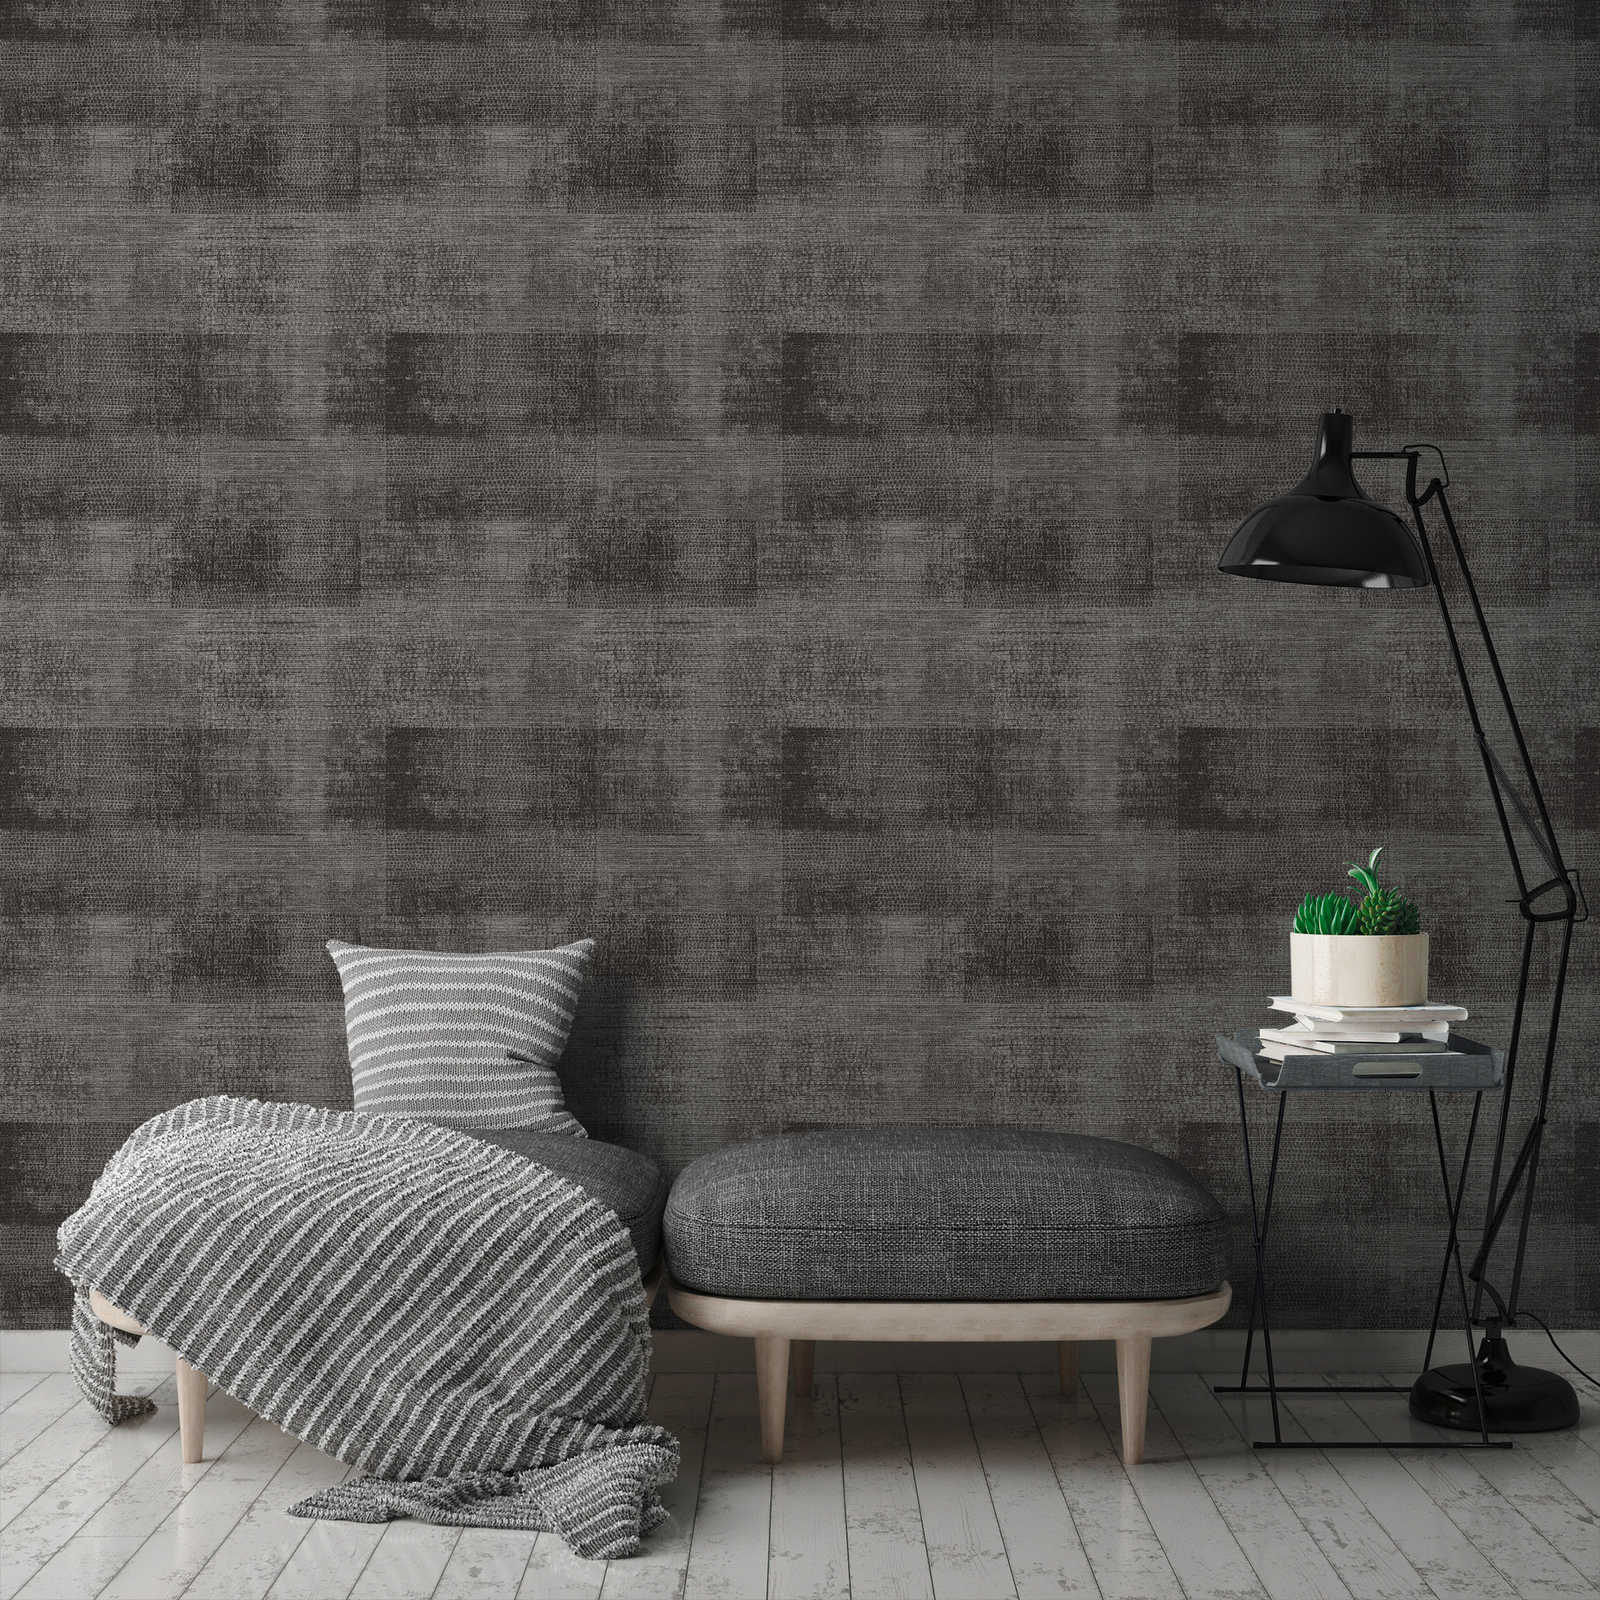             Non-woven wallpaper texture pattern in ethnic style - grey, black
        